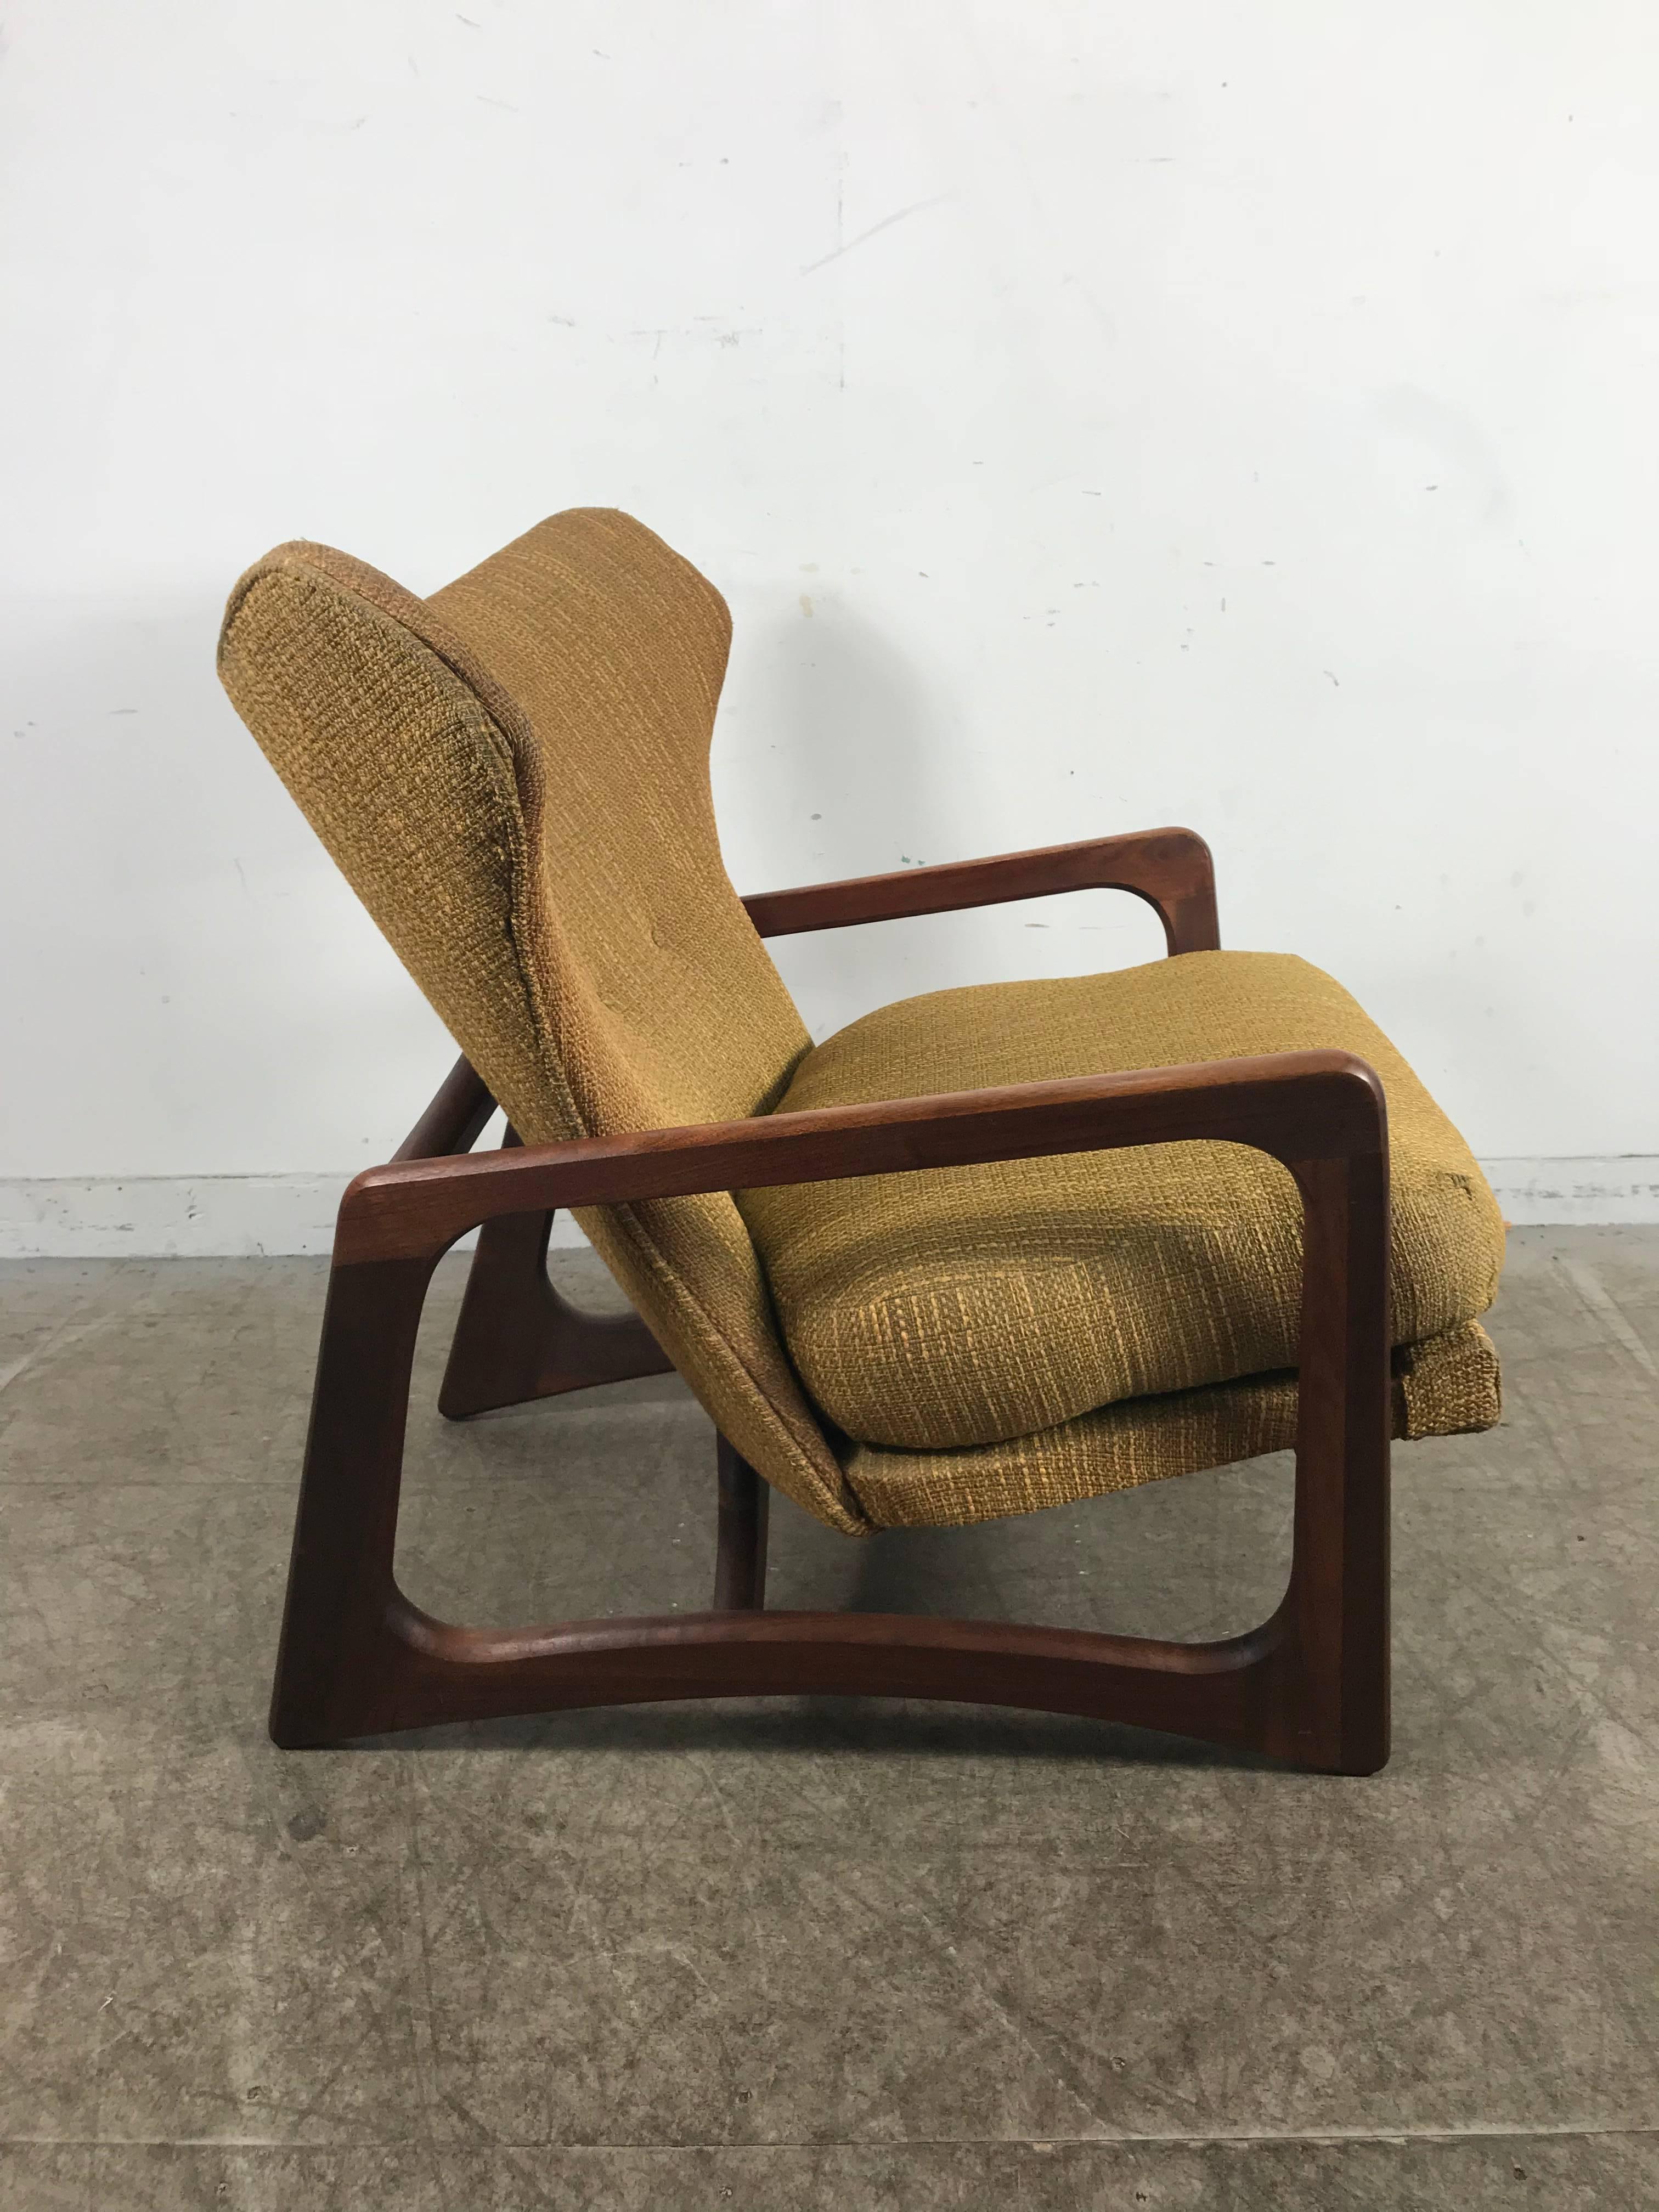 20th Century Modernist Sculptural Walnut Wing Back Lounge Chair by Adrian Pearsall